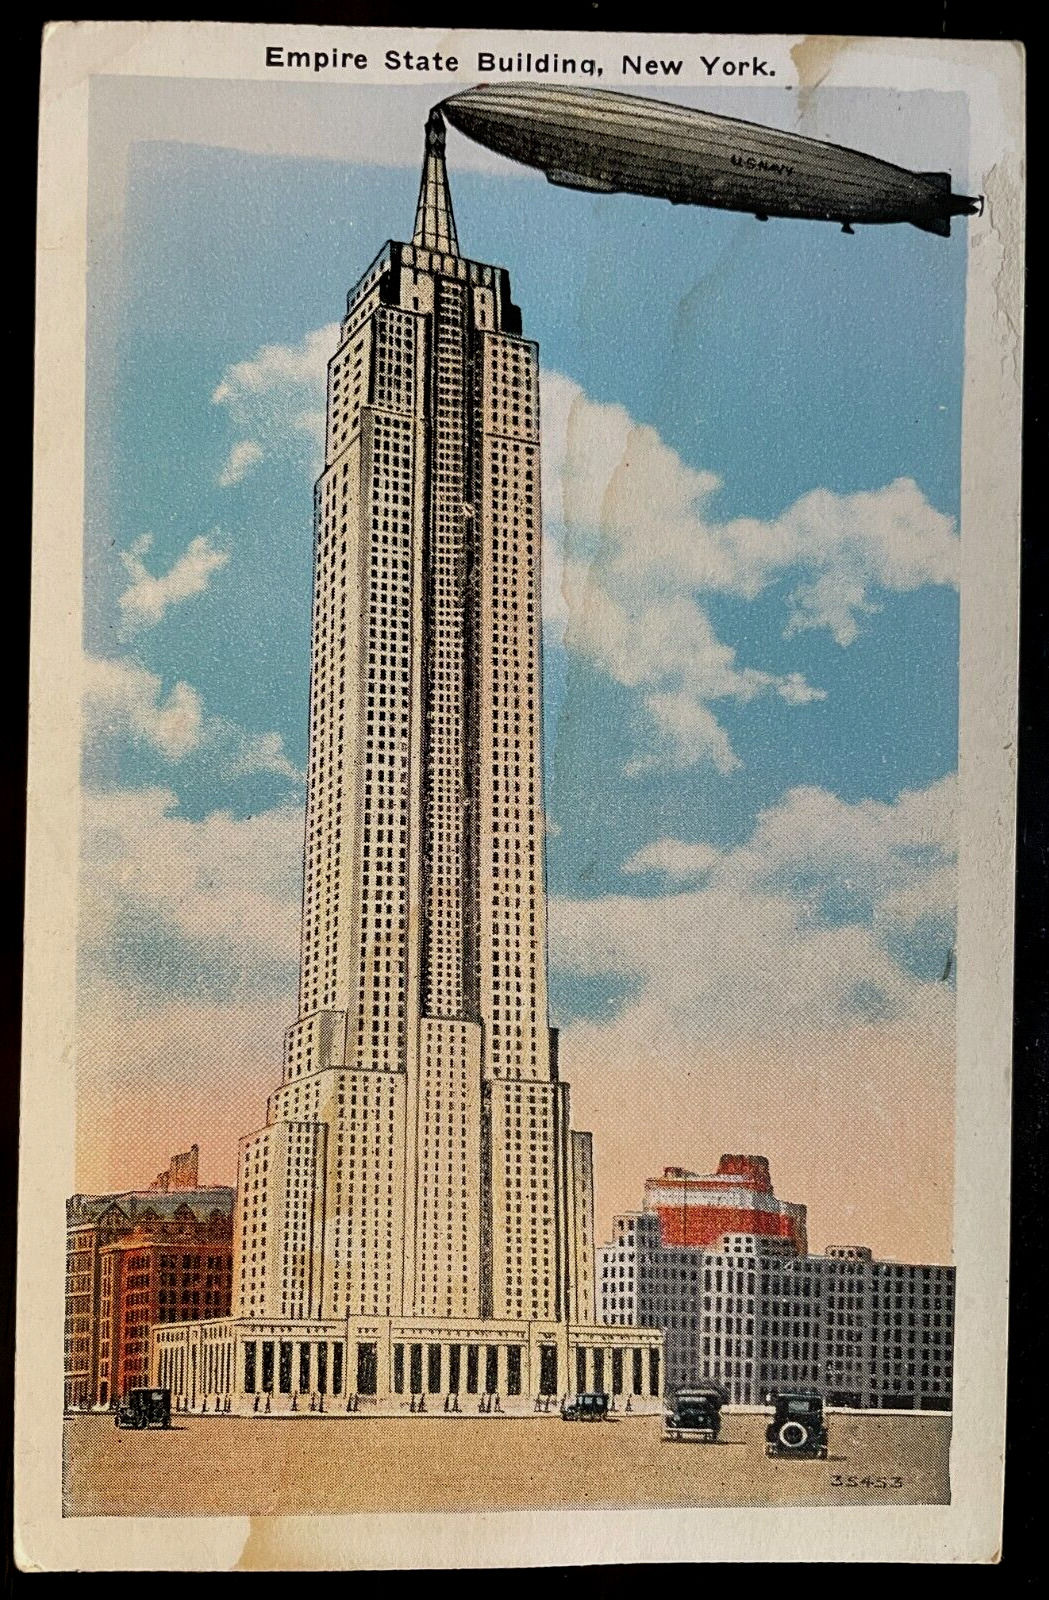 Vintage Postcard 1931 Empire State Building with Docked Blimp, New York City, NY